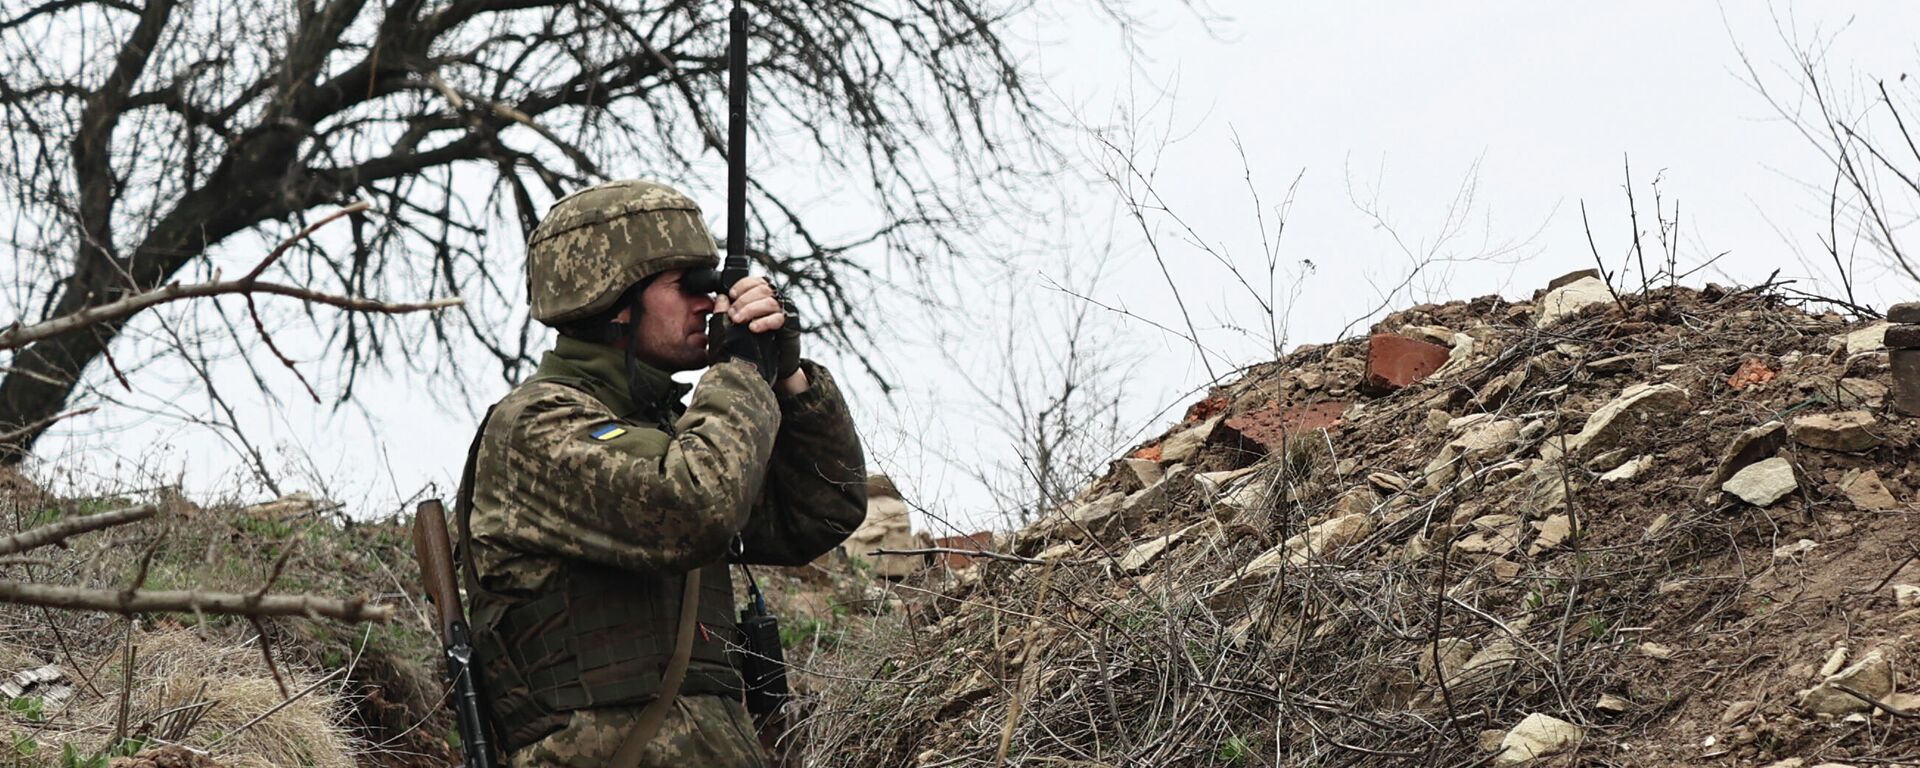 FILE - In this April 12, 2021, file photo, Ukrainian soldier watches through a periscope at fighting positions near Donetsk, Ukraine - Sputnik International, 1920, 03.02.2022